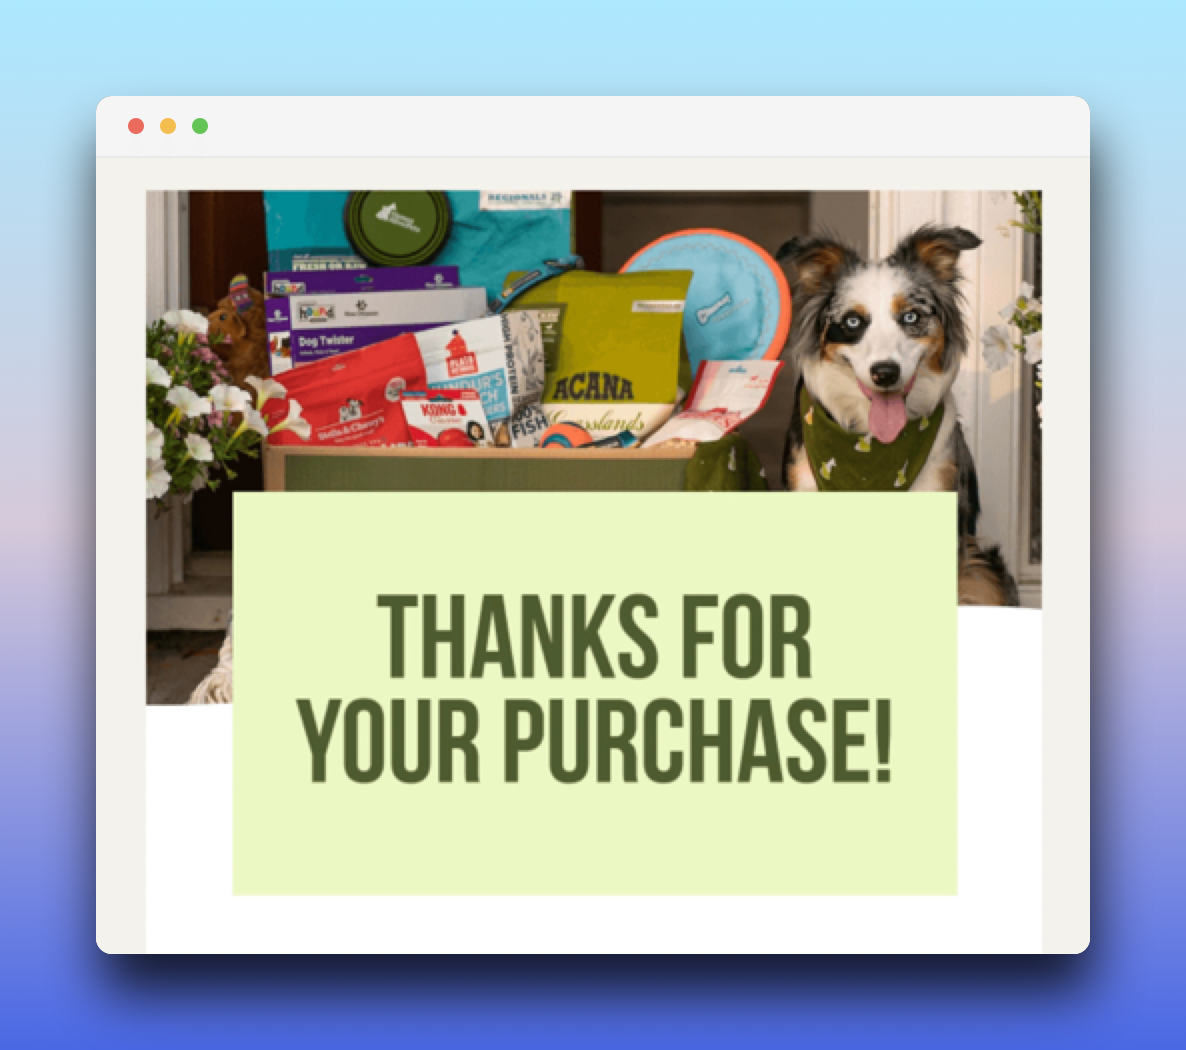 thank you page example with the text "thank you for your purchase!" and a blue eyed dog next to pet snacks  and goodies basket